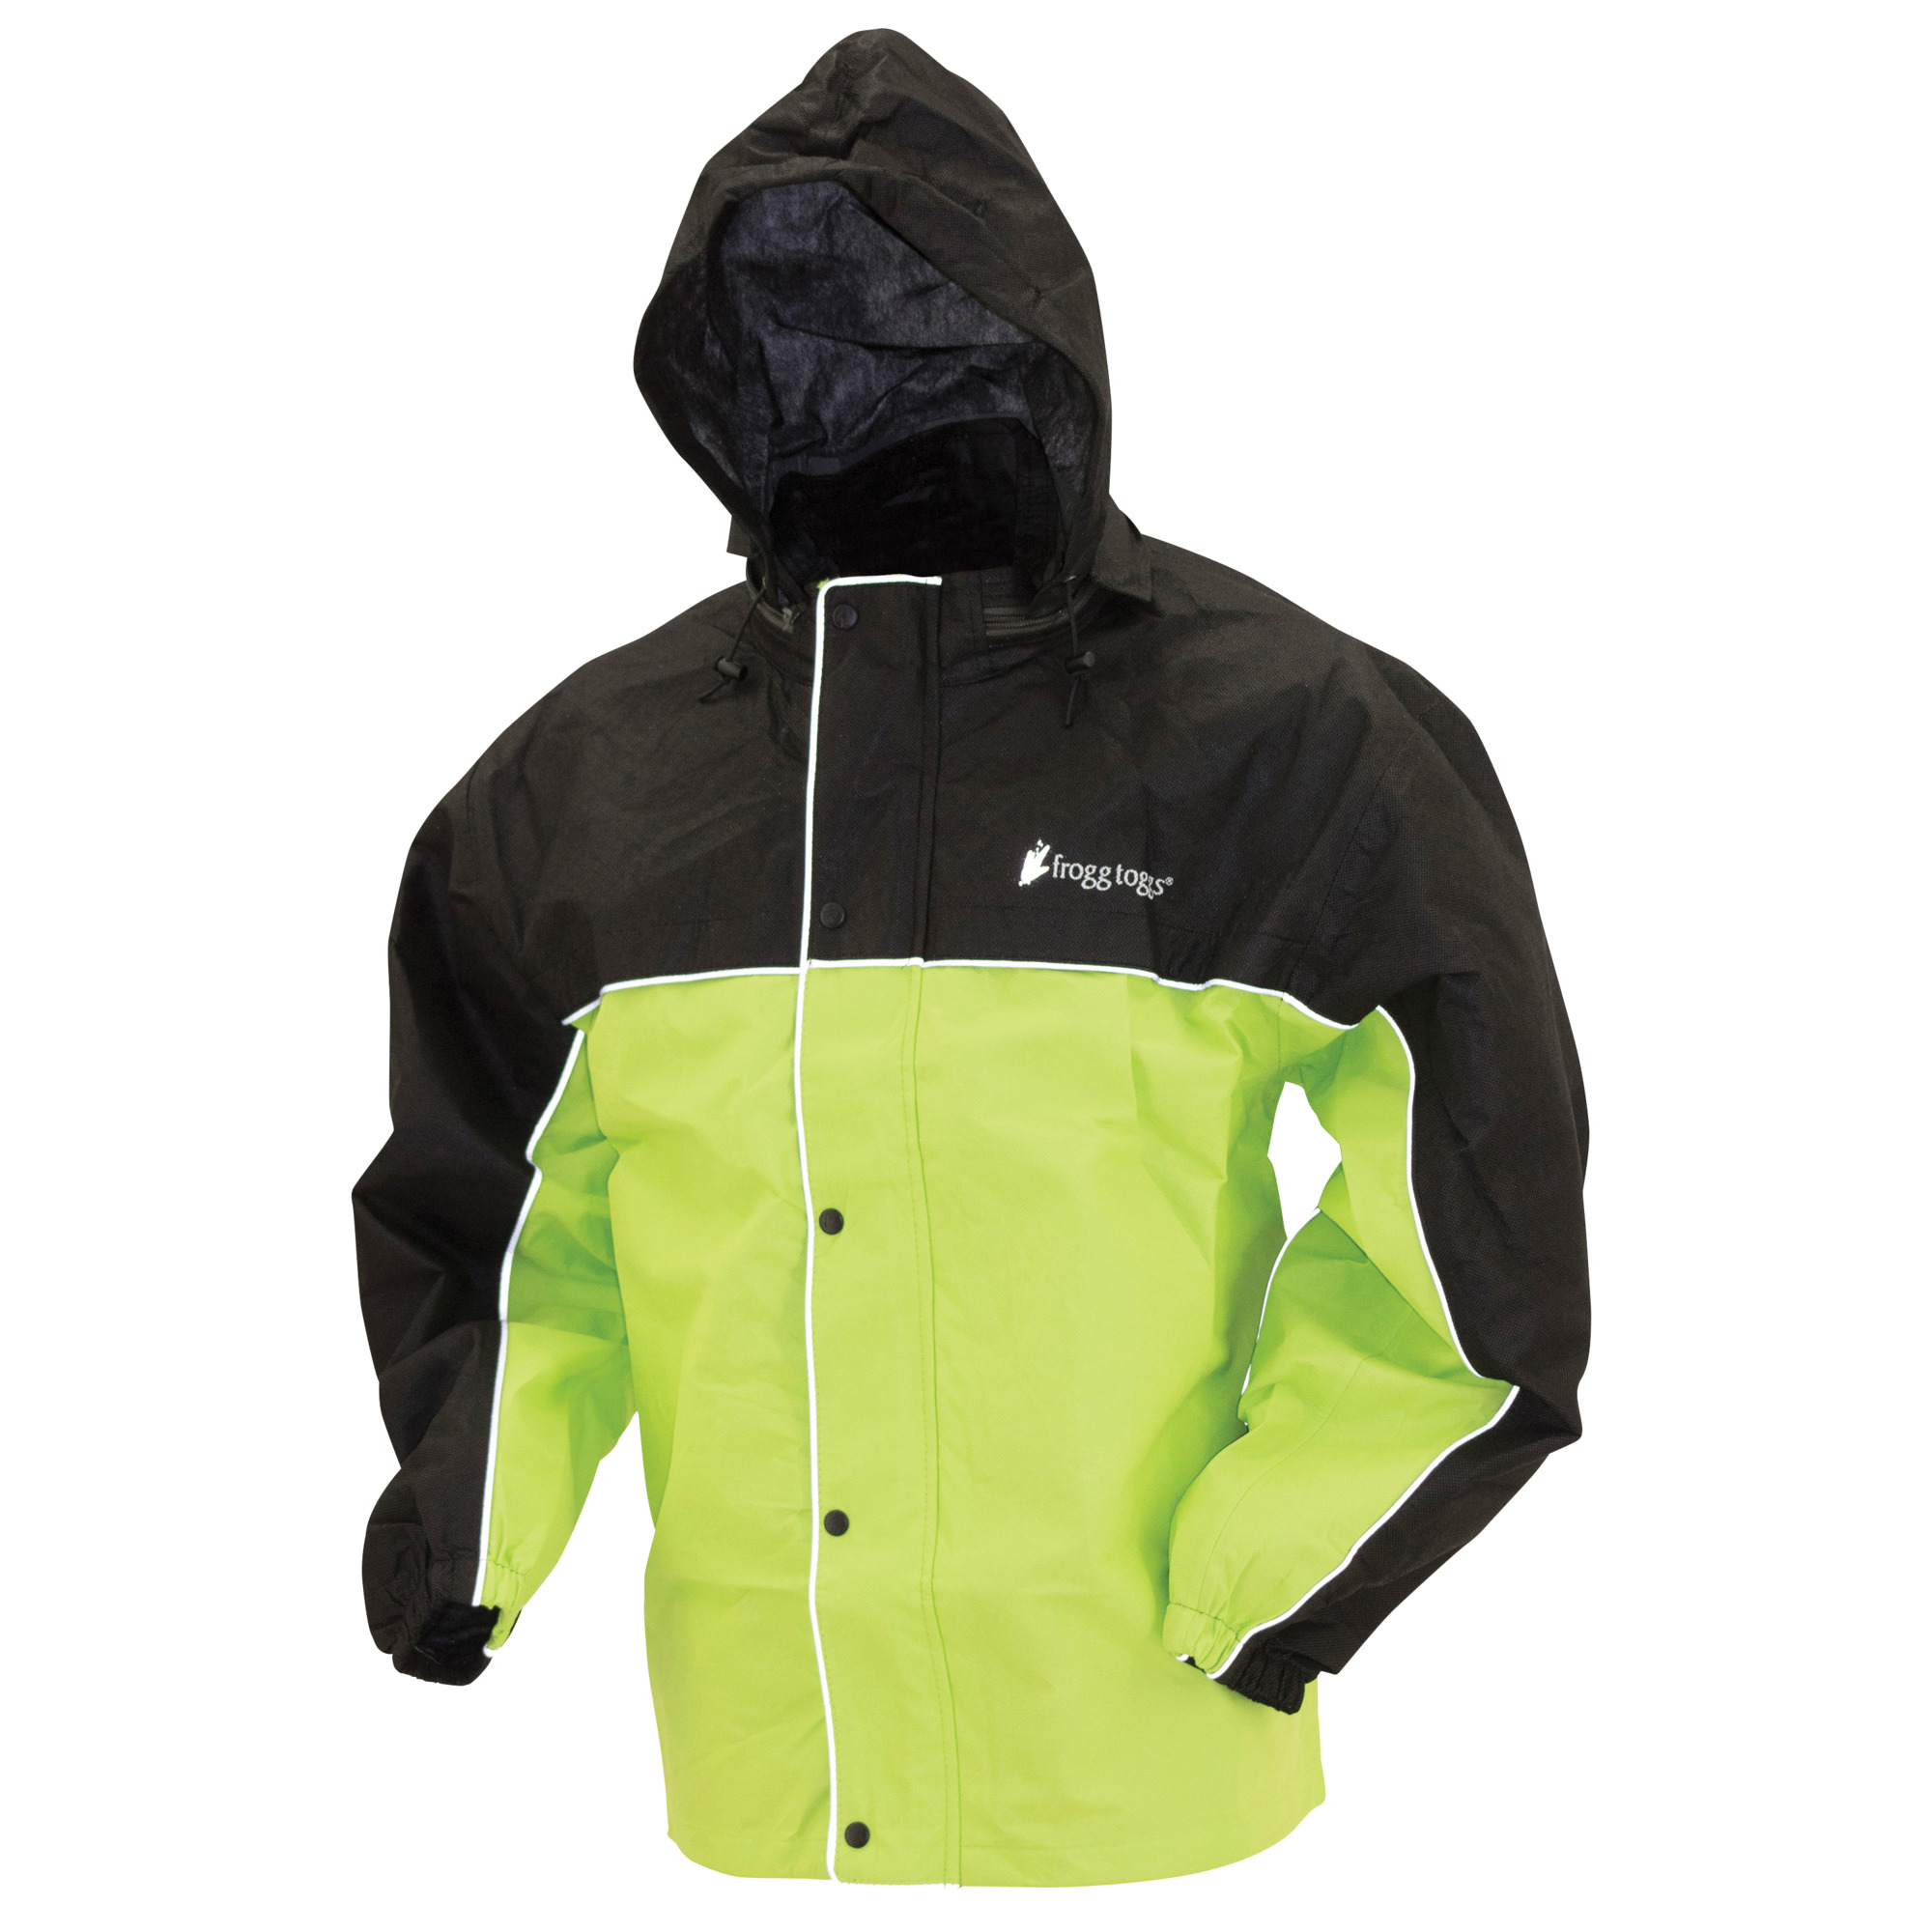 frogg toggs, Road Toad Reflective Jacket, Size XL, Color Lime / Black with Frogg Eyzz, Model FT63133-148XL